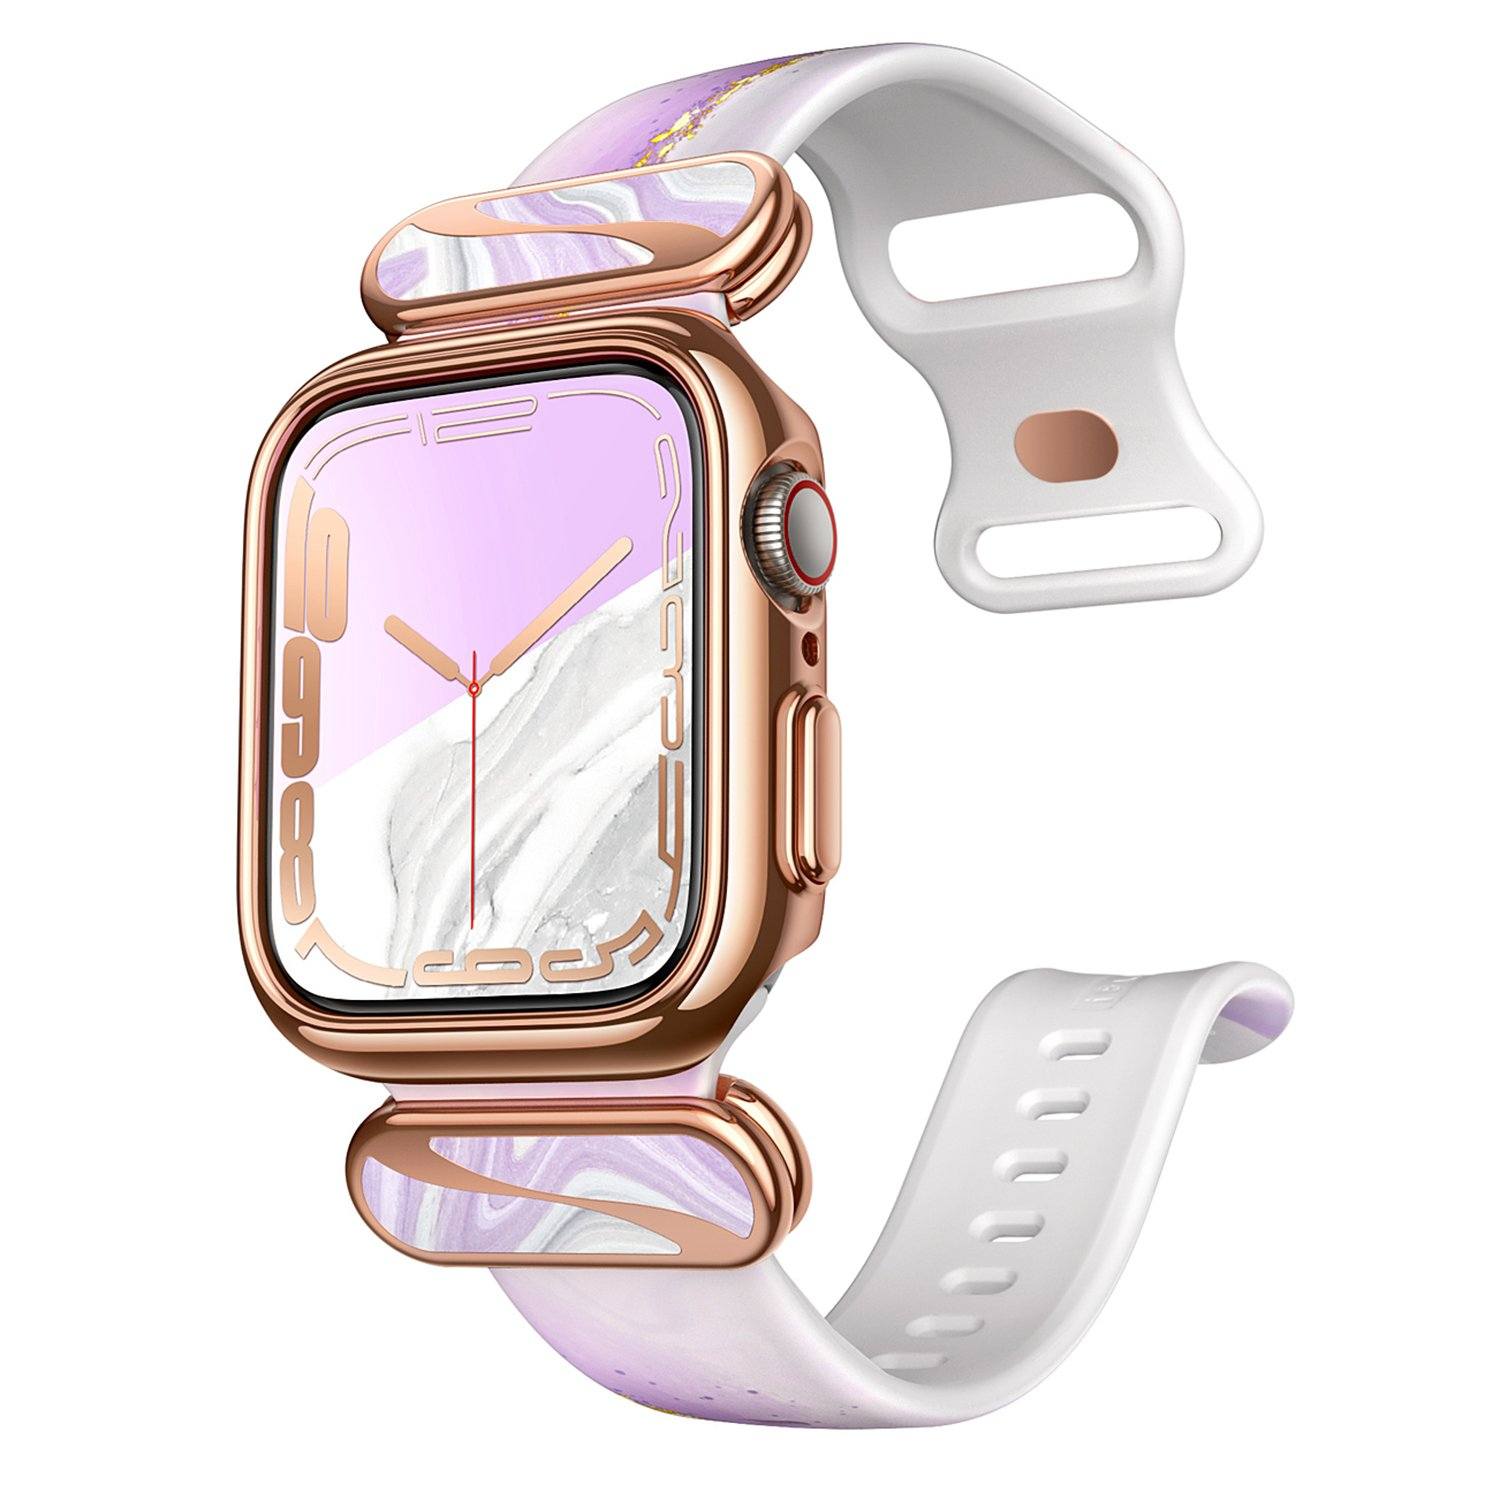 i-Blason Cosmo Stylish Sporty Protective Bumper Case with Adjustable Strap Bands for Apple Watch Series 7/6/SE/5/4 (40mm/41mm) Default i-Blason Ameth 